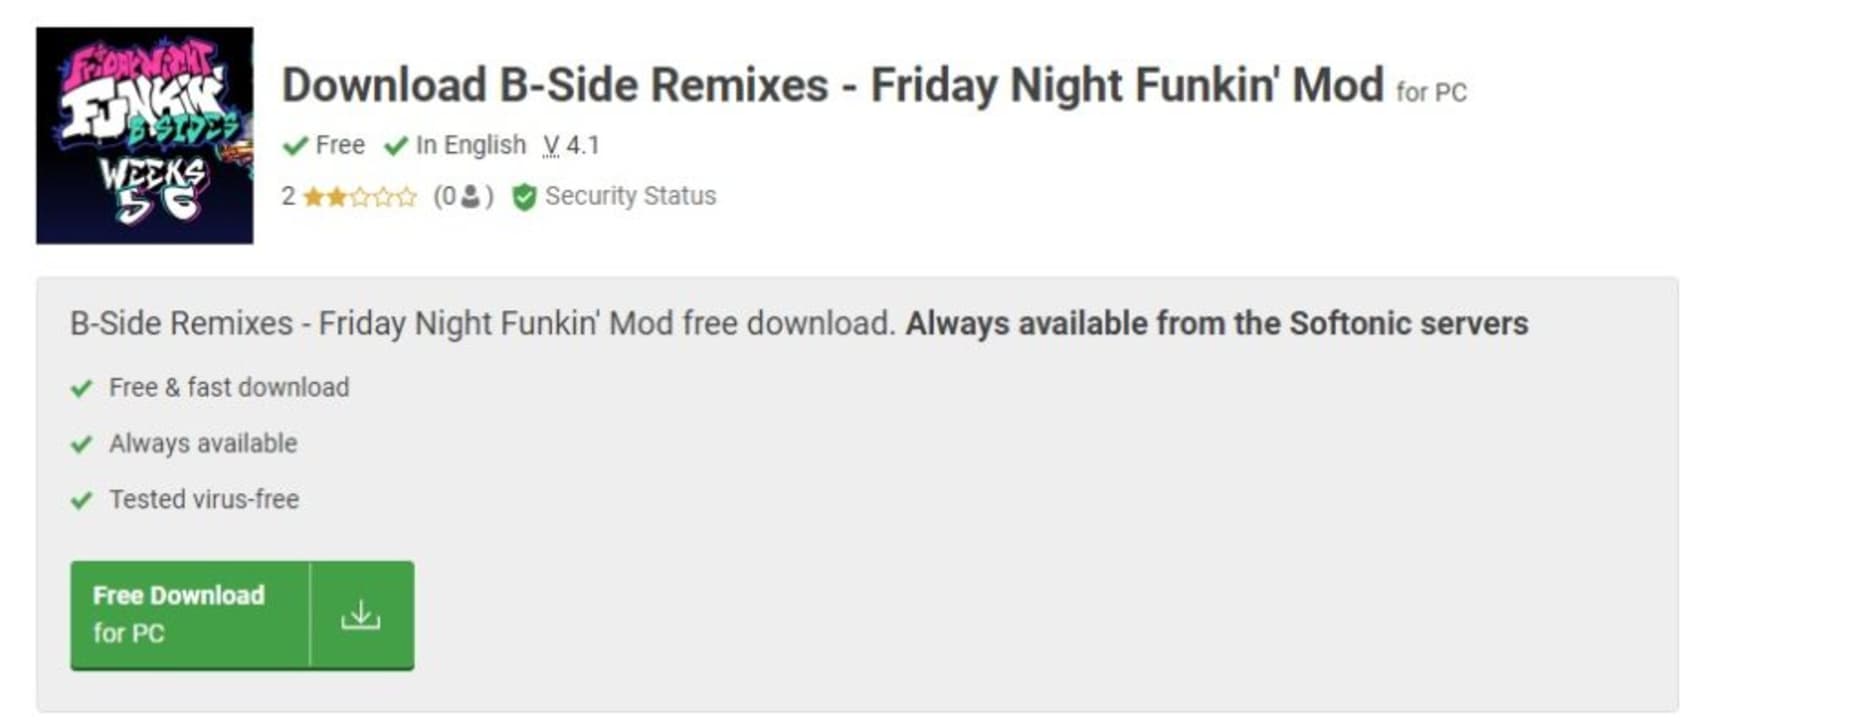 How to Install B-Side Remixes